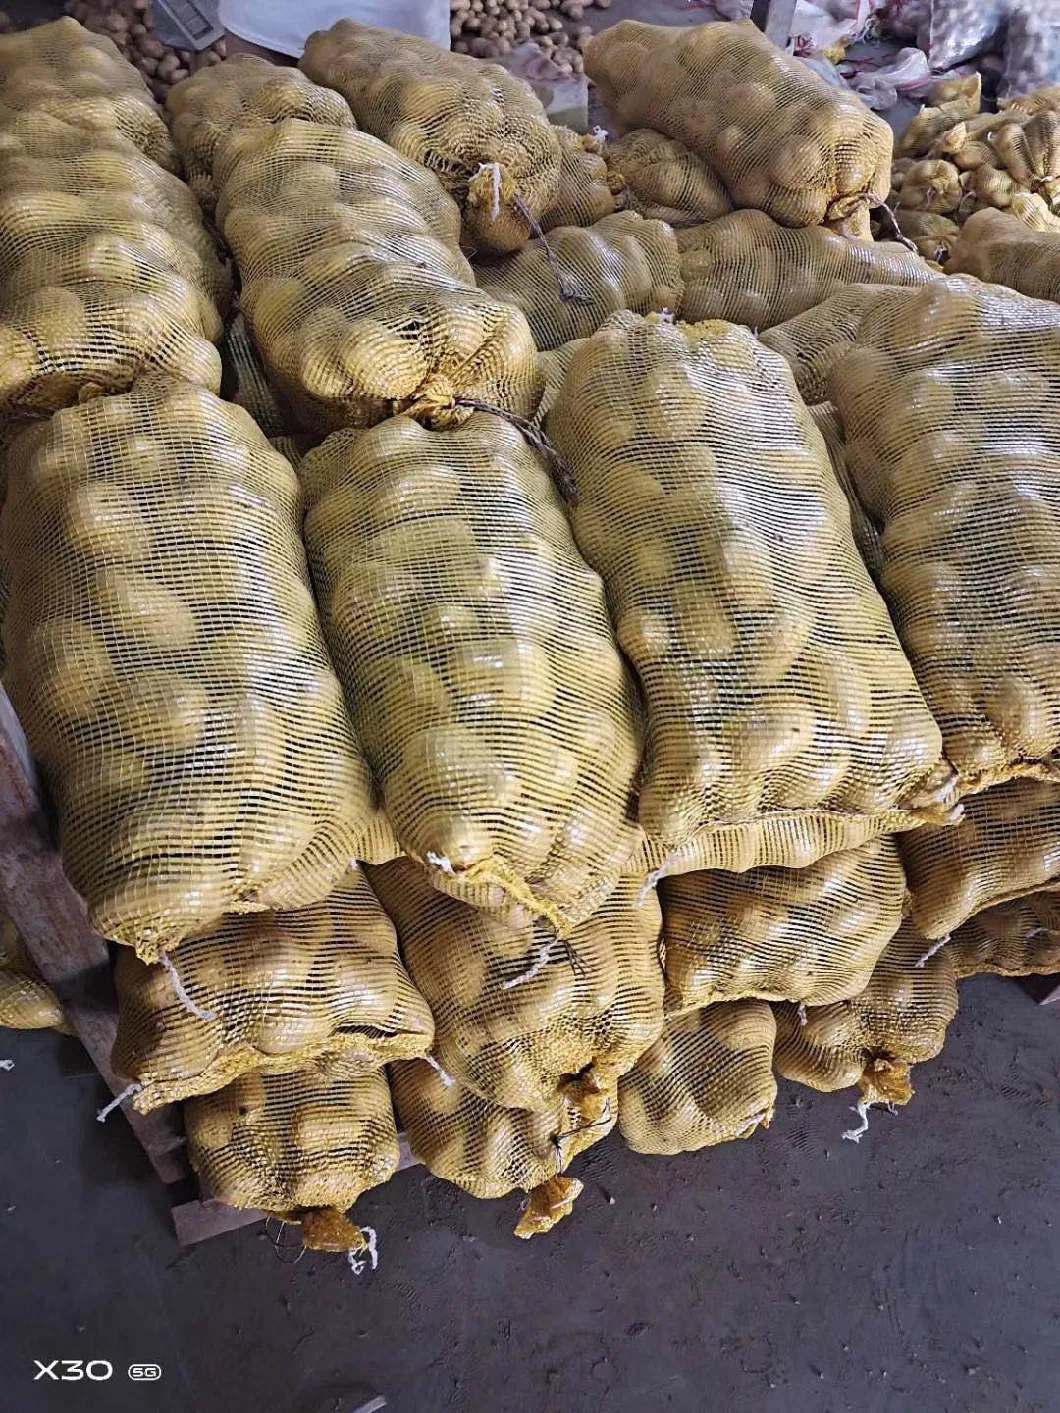 Chinese New Crop Selected Super Fresh Potato